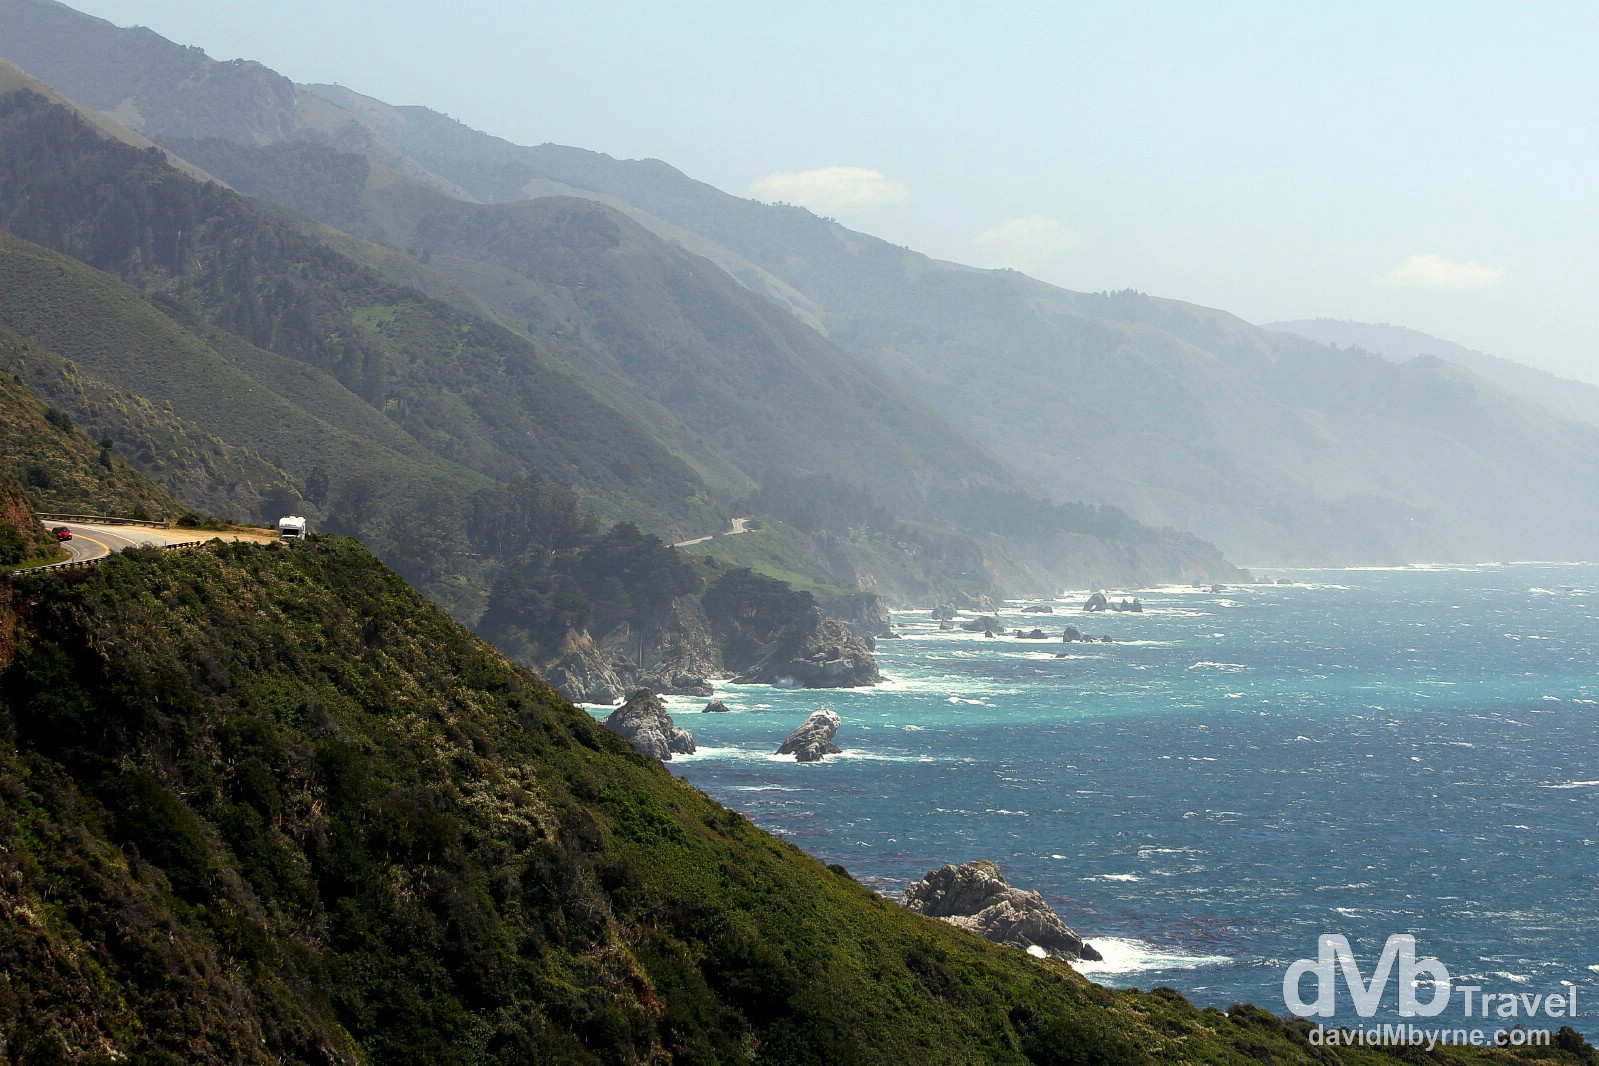 State Route 1/Pacific Coast Highway, California, USA. April 8th 2013.